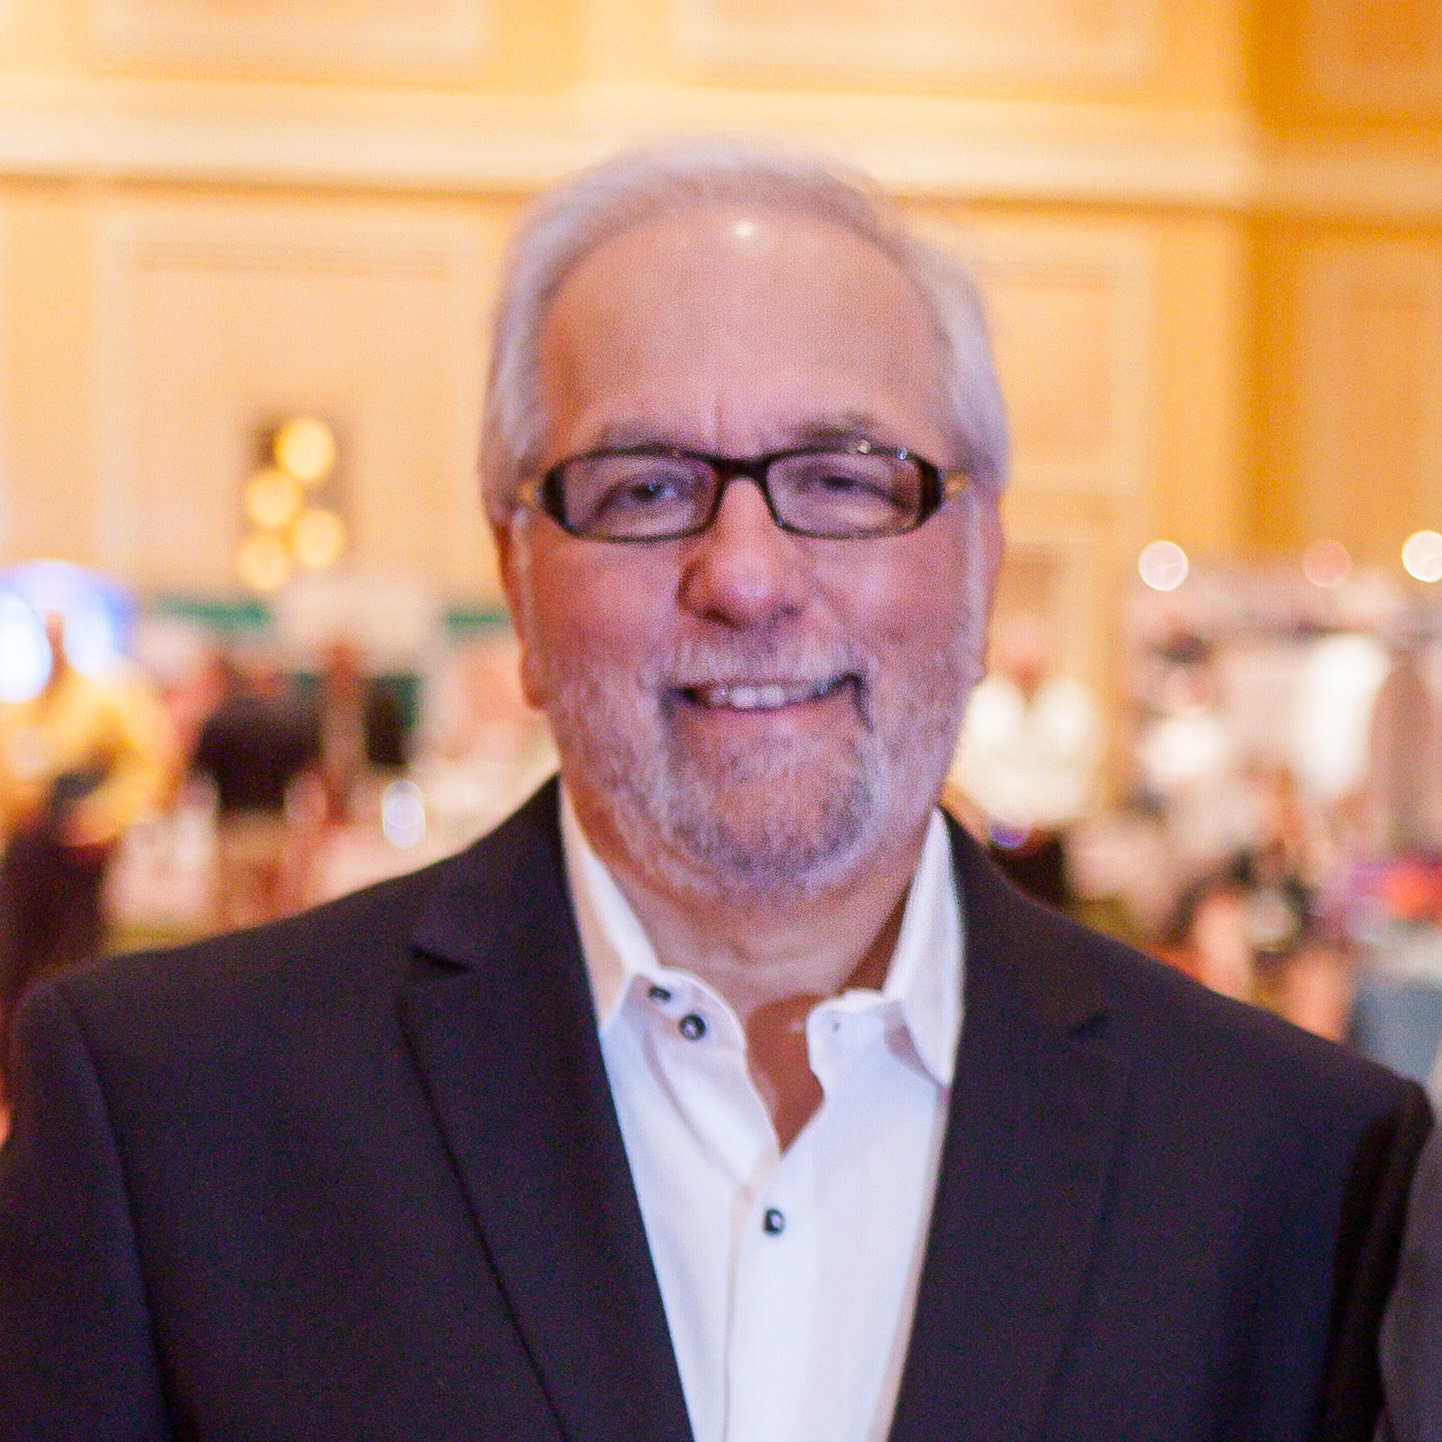 Bob Dorsa, the Founder and President of the American Credit Union Mortgage Association (ACUMA), has announced that he will be retiring in January 2020